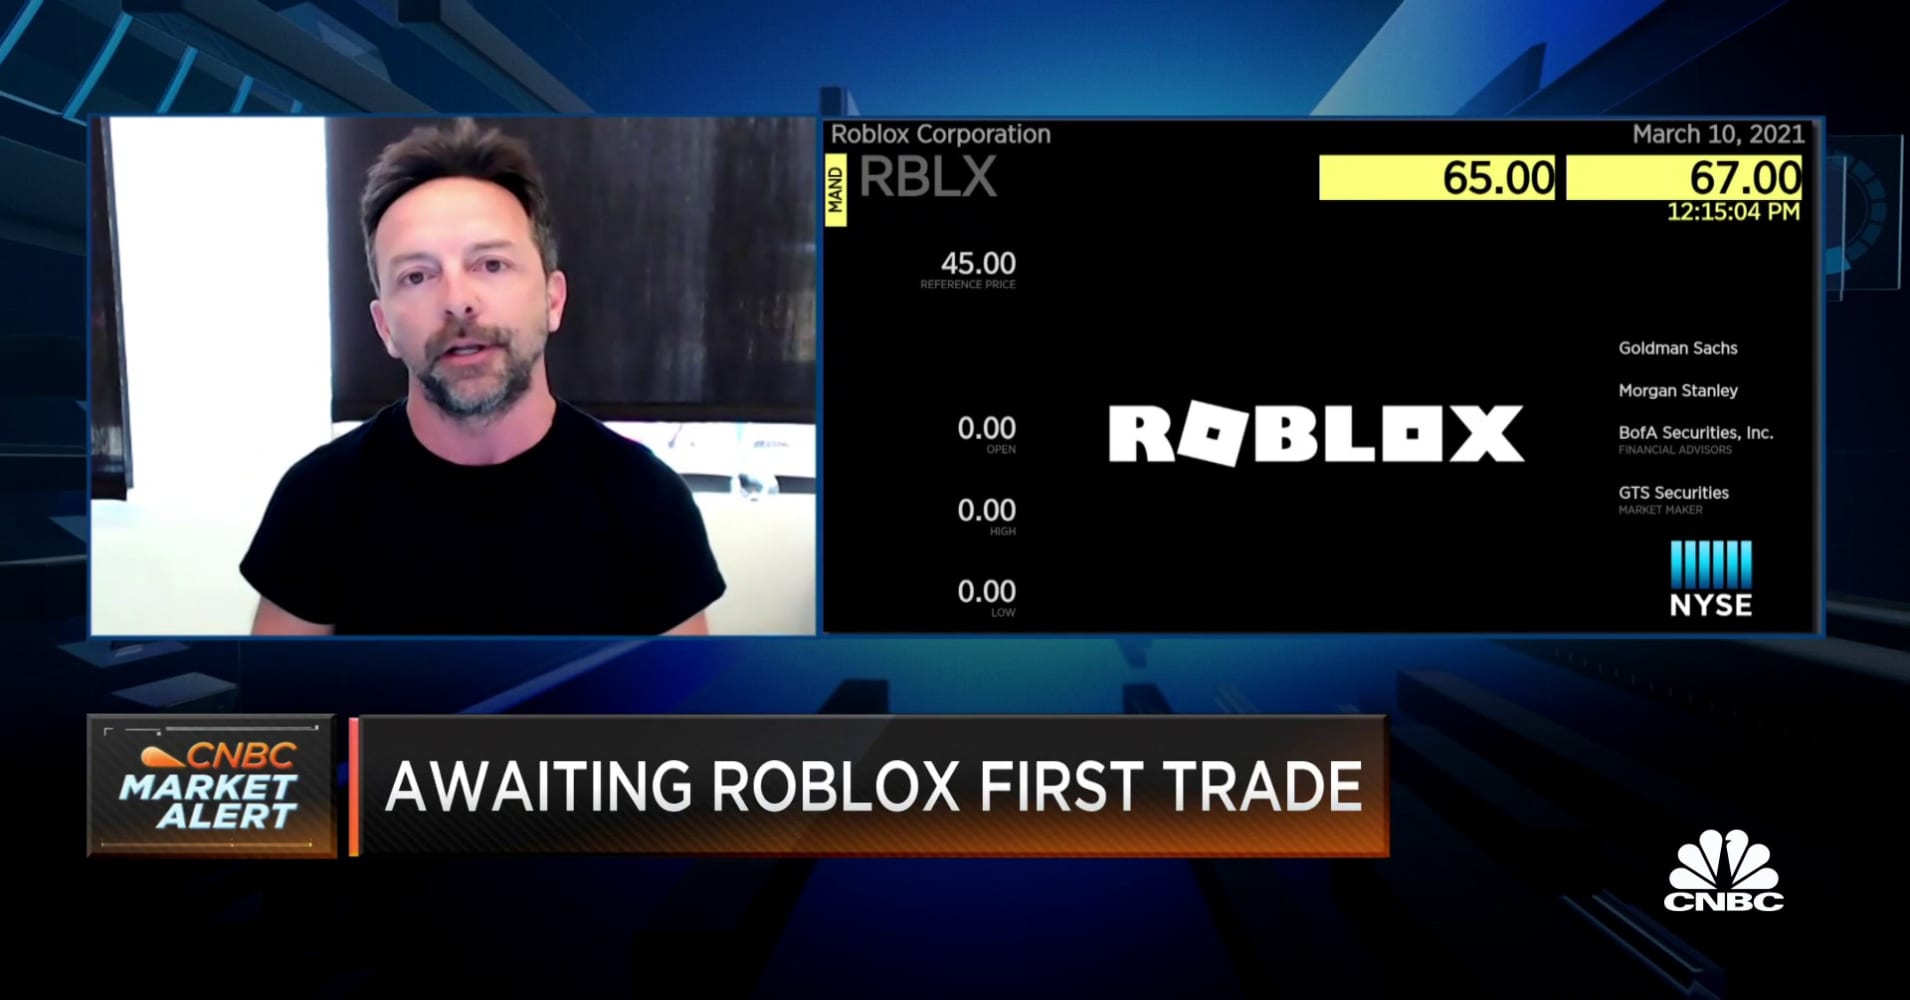 Roblox Rblx Goes Public With A Bet On The Metaverse - roblox plus api